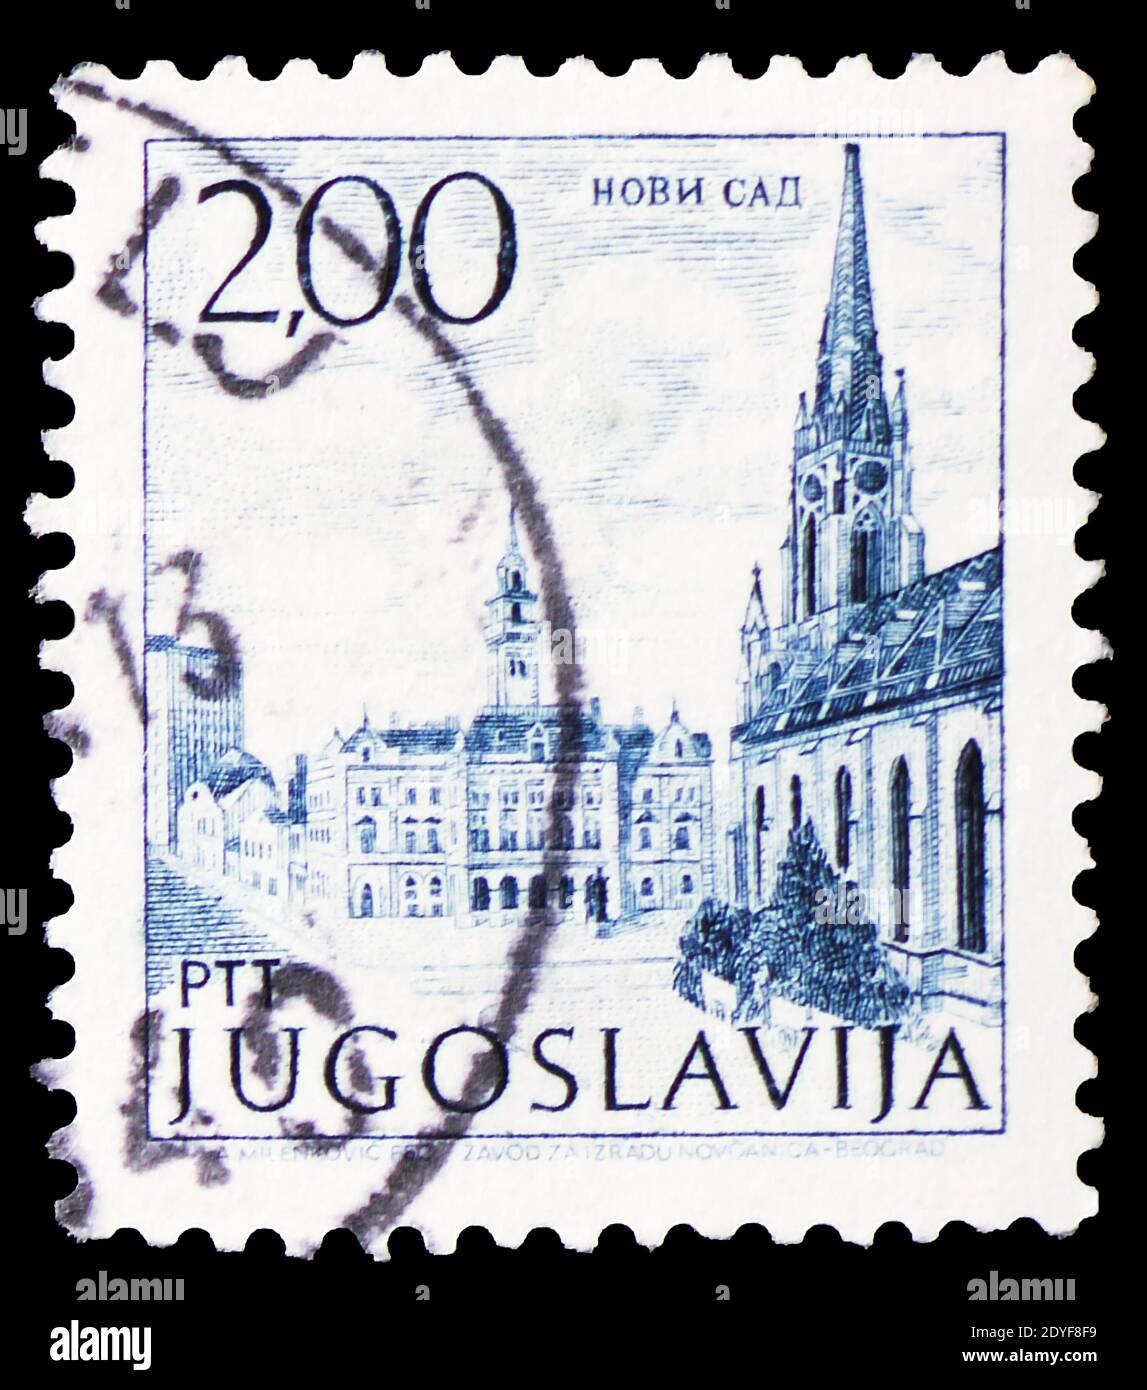 MOSCOW, RUSSIA - MARCH 23, 2019: A stamp printed in Yugoslavia shows City Hall Square with Cathedral, Novi Sad, Tourism-Definitive Small serie, circa Stock Photo